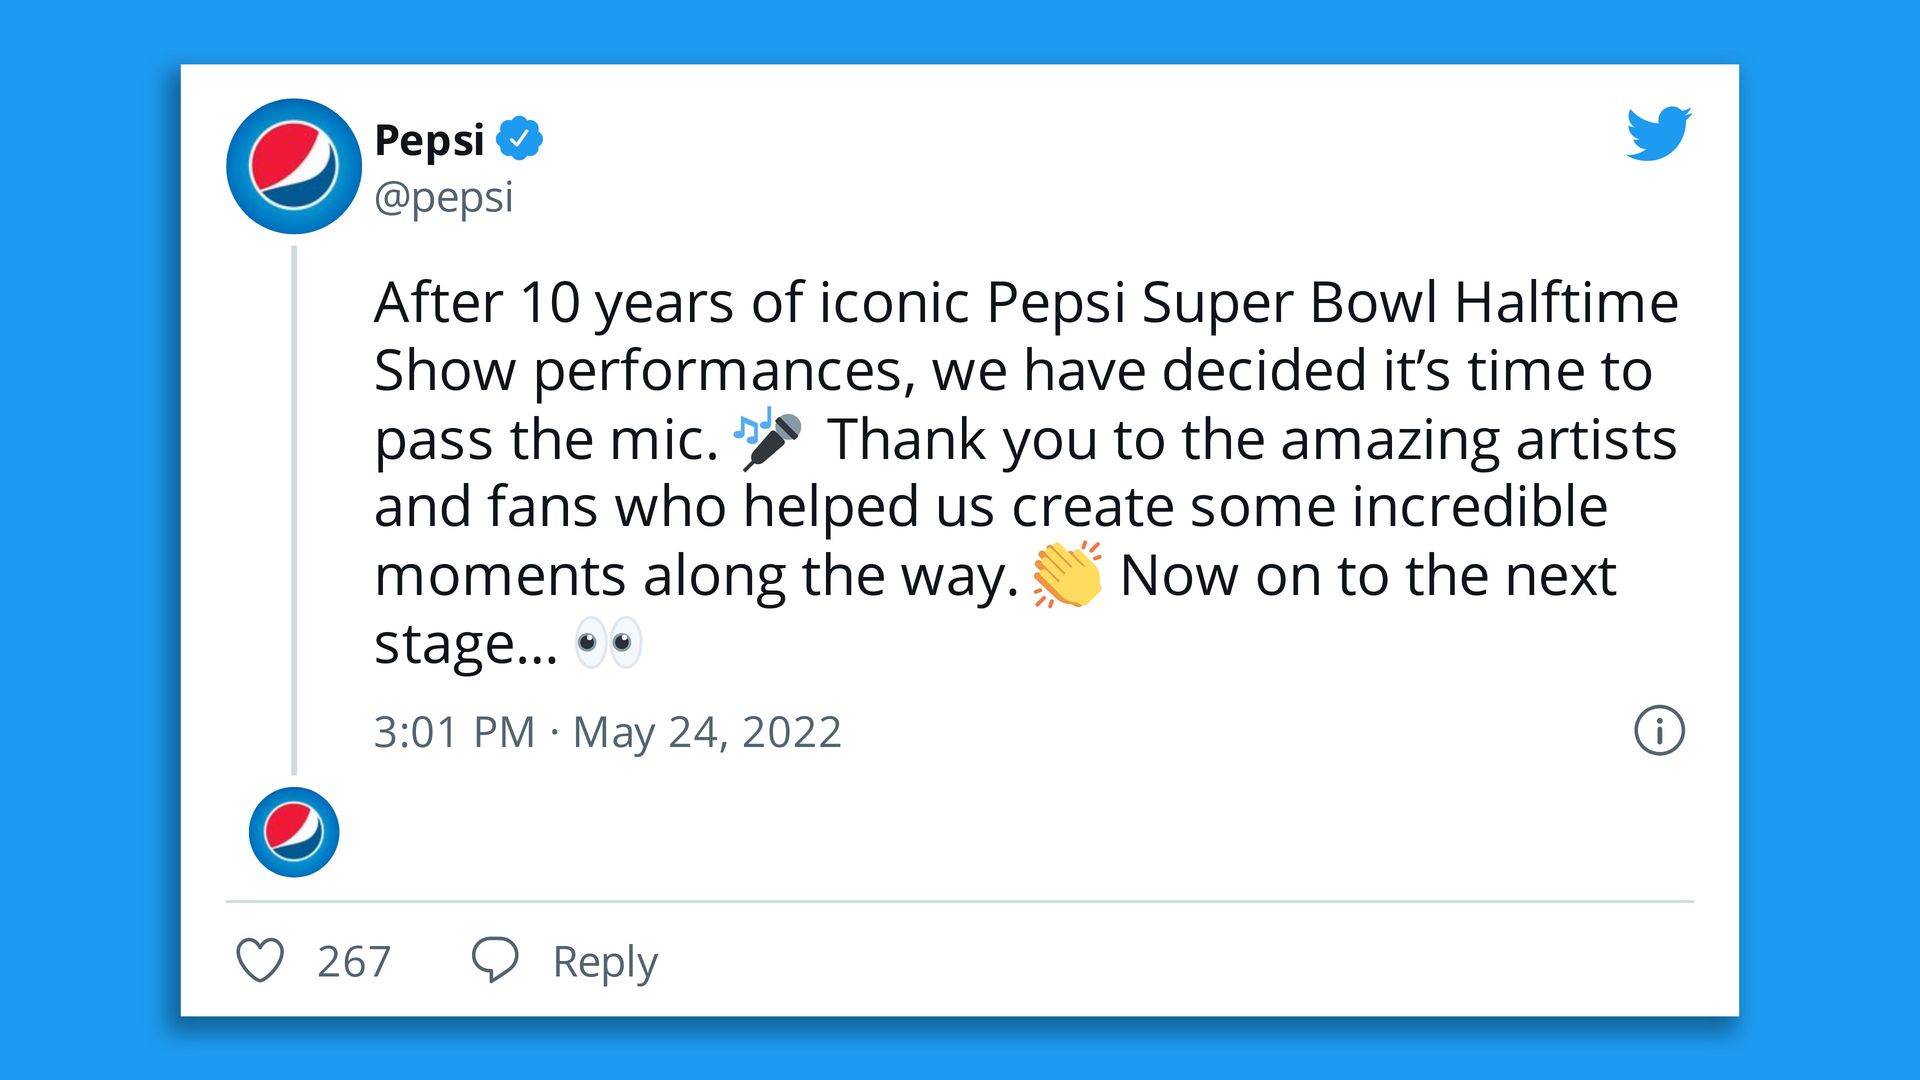 "After 10 years of iconic Pepsi Super Bowl Halftime Show performances, we have decided it’s time to pass the mic," Pepsi tweeted.